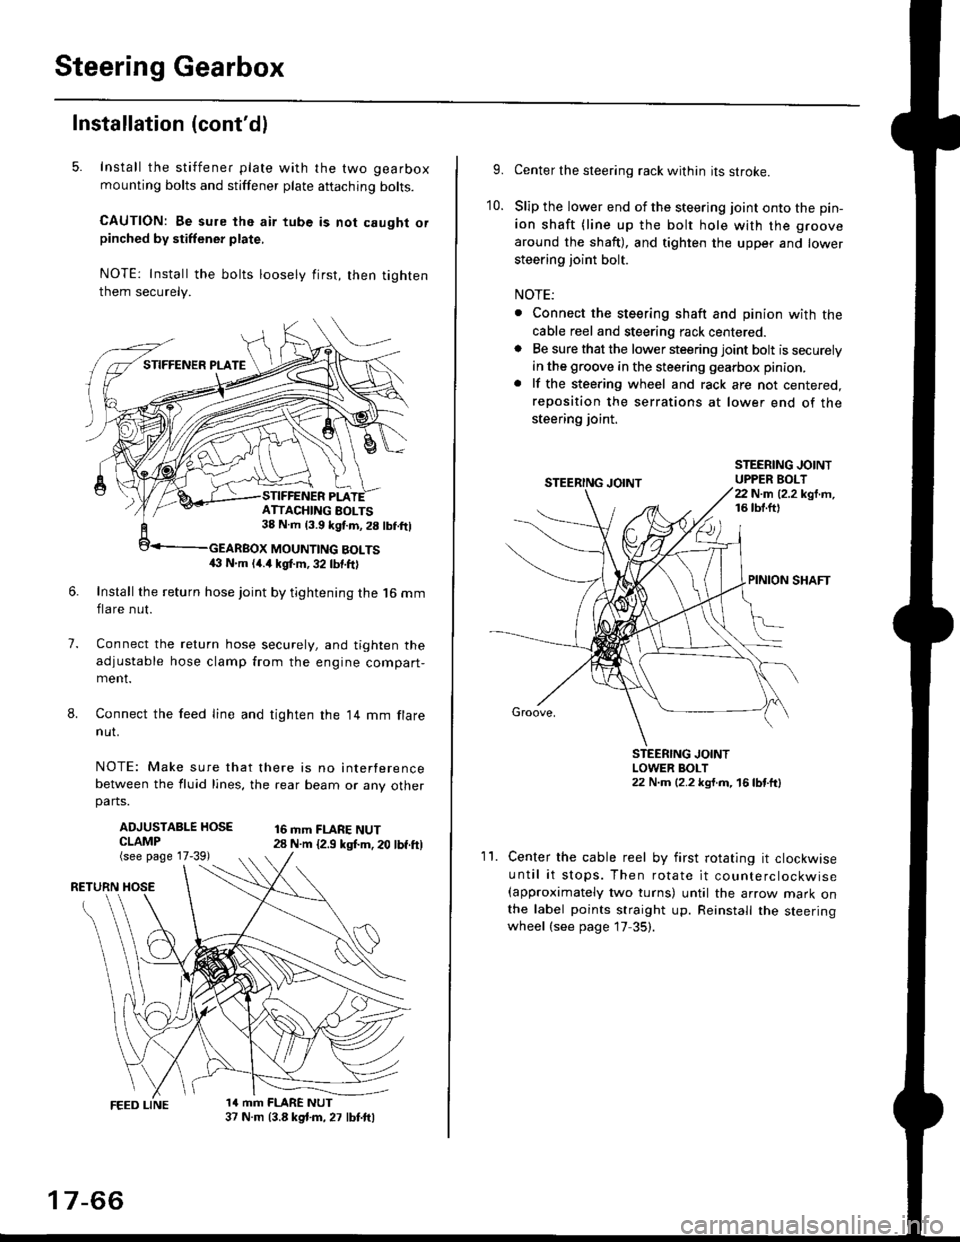 HONDA CIVIC 1998 6.G Workshop Manual Steering Gearbox
Installation (contdl
5. Install the stiffener plate with the two gearbox
mounting bolts and stiffener plate aftaching bolts.
CAUTION: Be sure the air tube is not caught orpinched by 